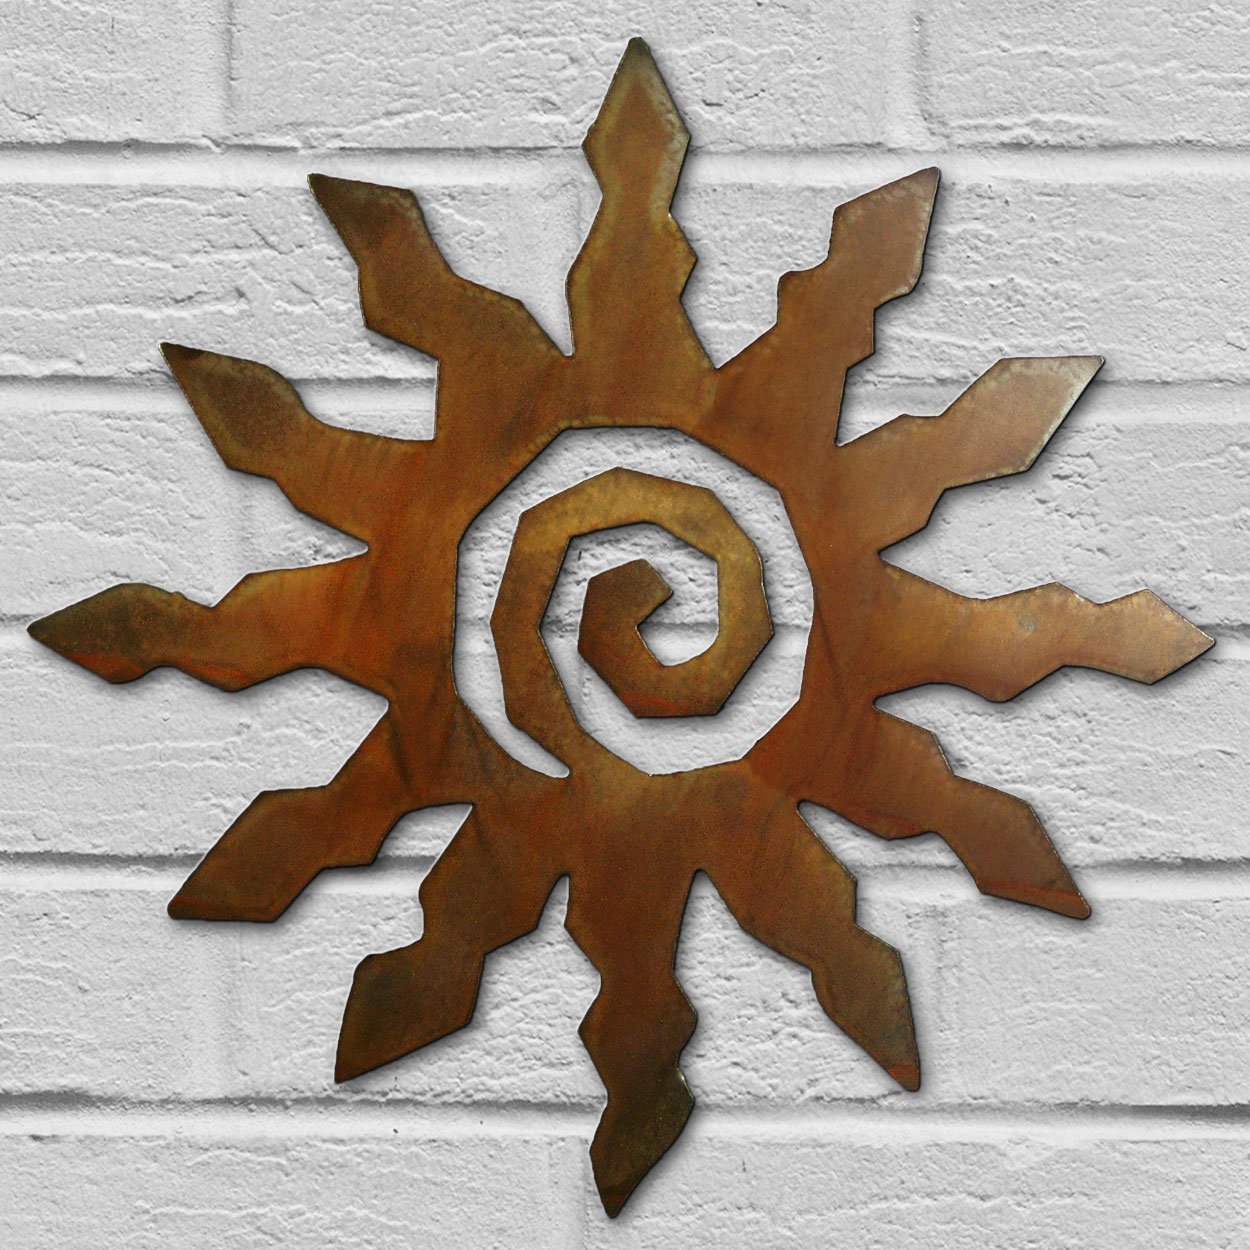 165151 - 12in 12-Ray Spiral Sun 3D Southwest Metal Wall Art in Rust Finish